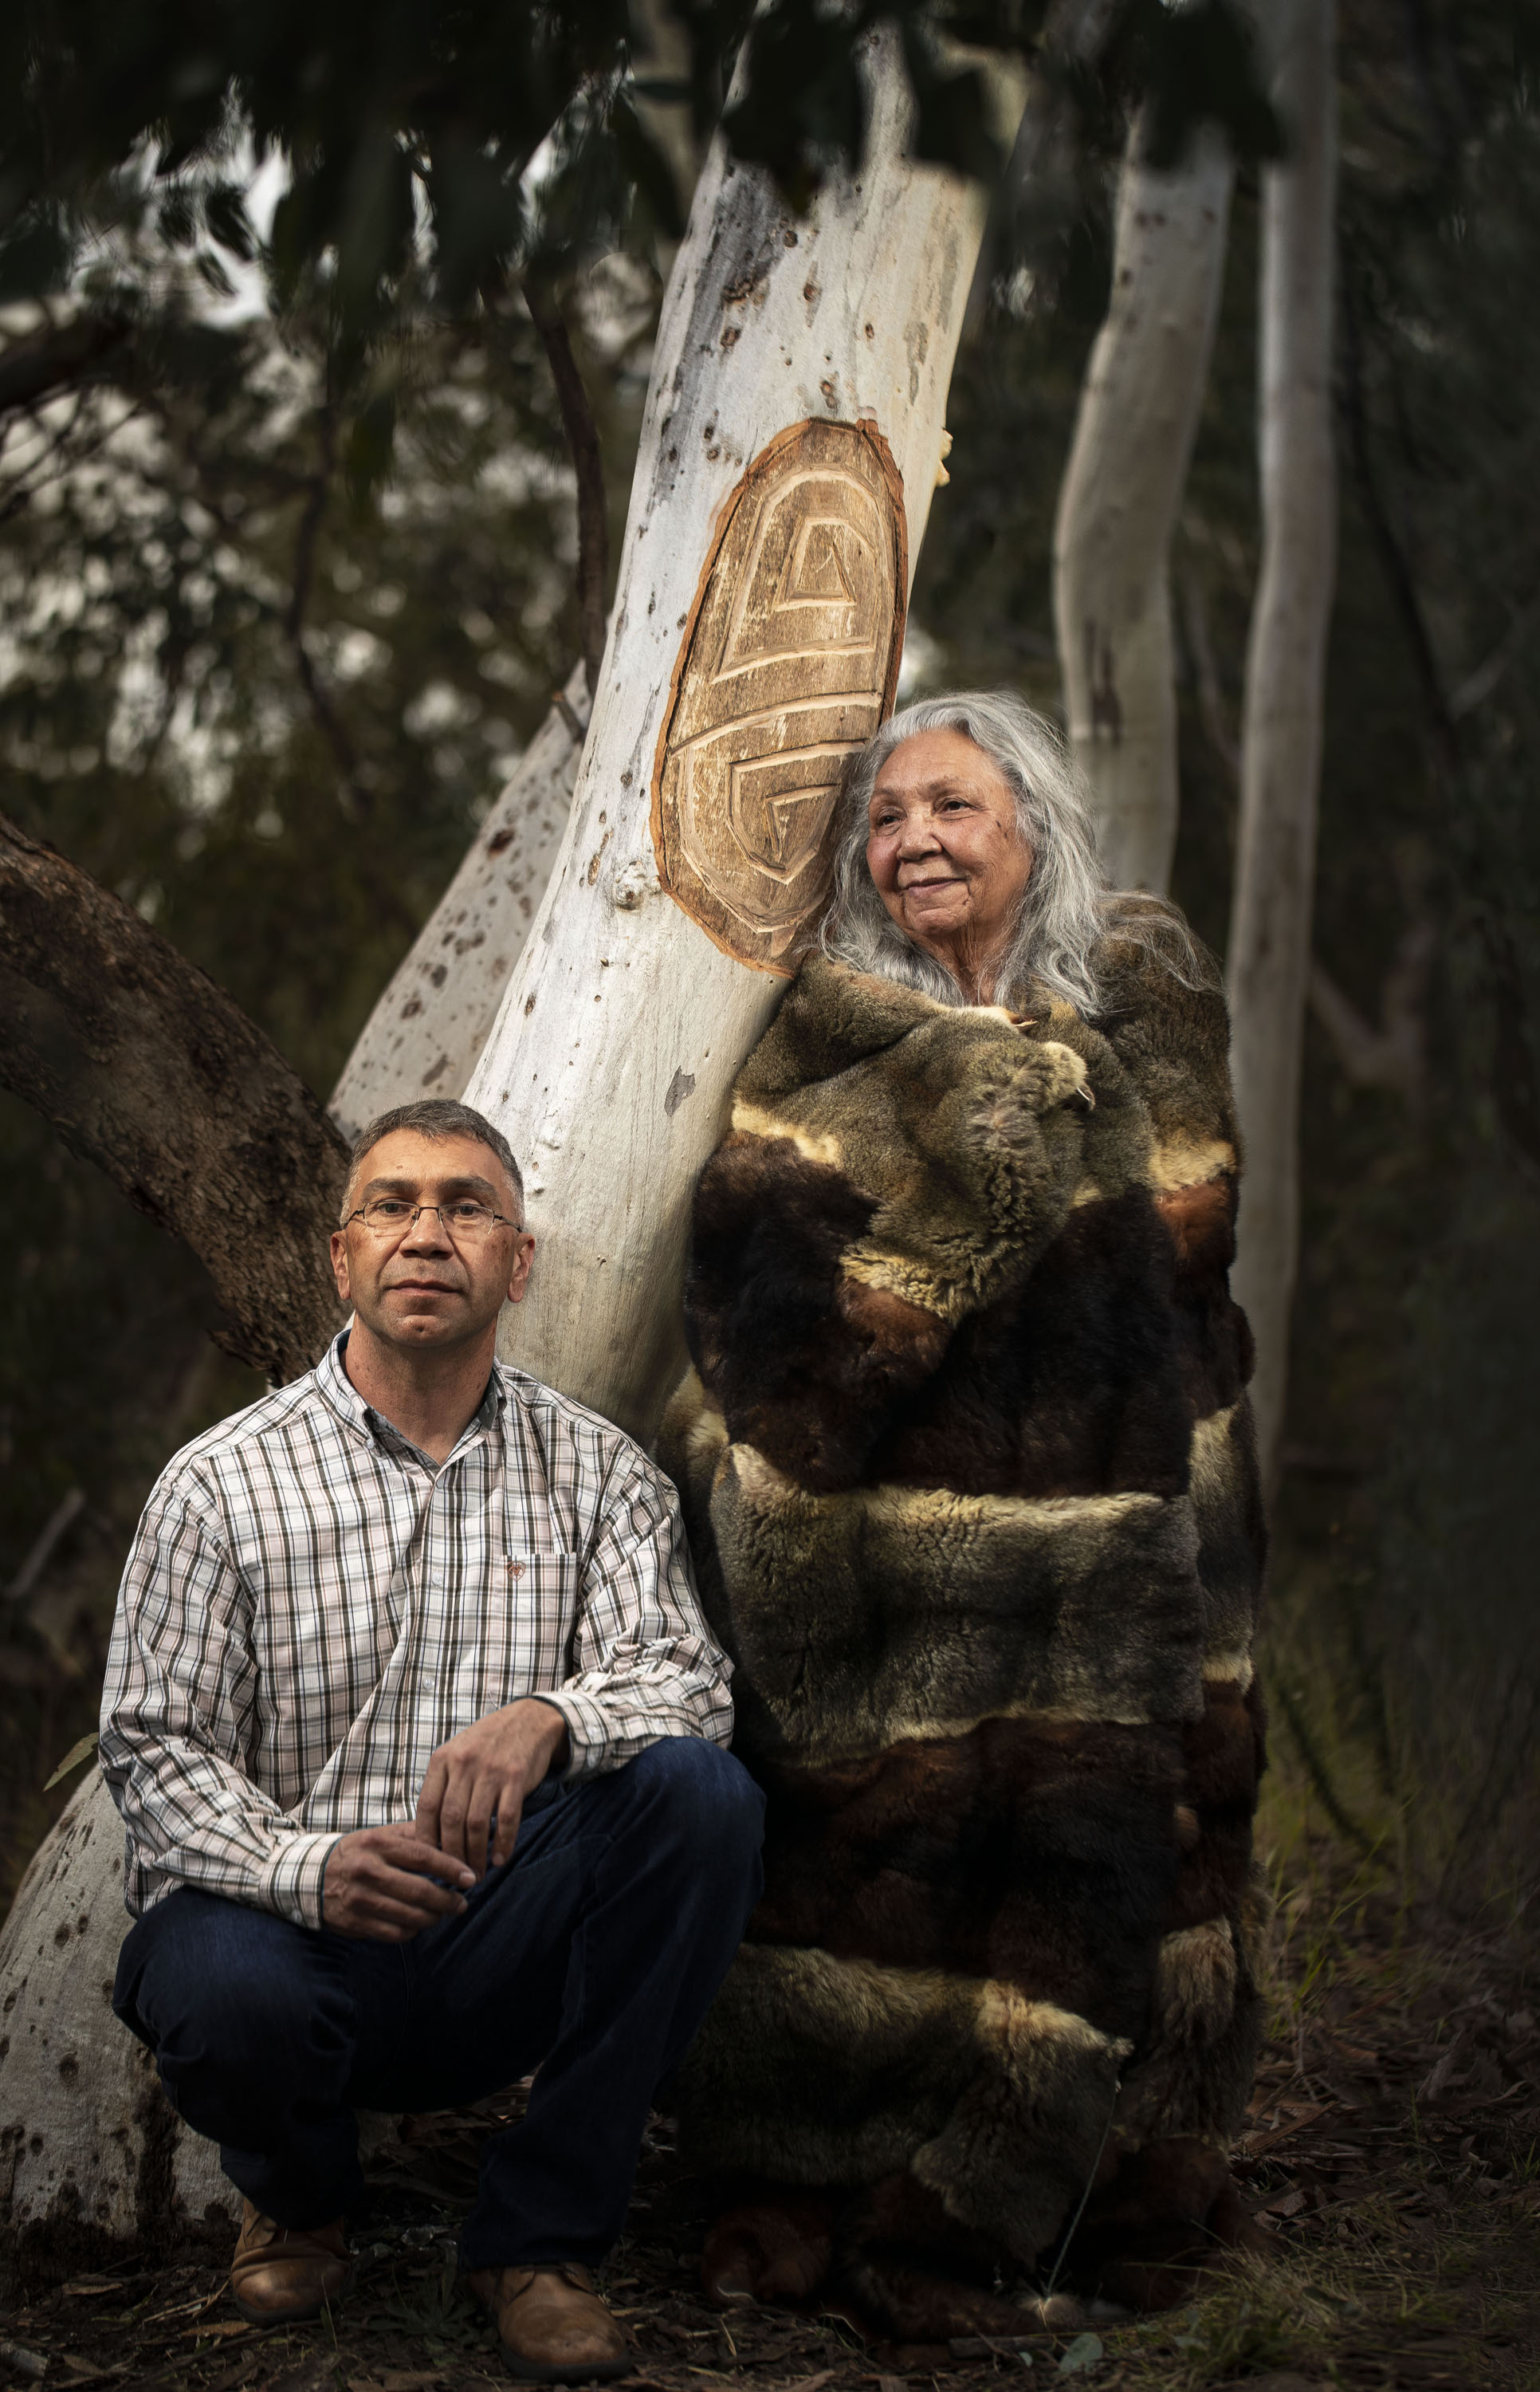 A grizzled aboriginal man squats next to an older aboriginal woman standing next to a tree that has been carved with a design